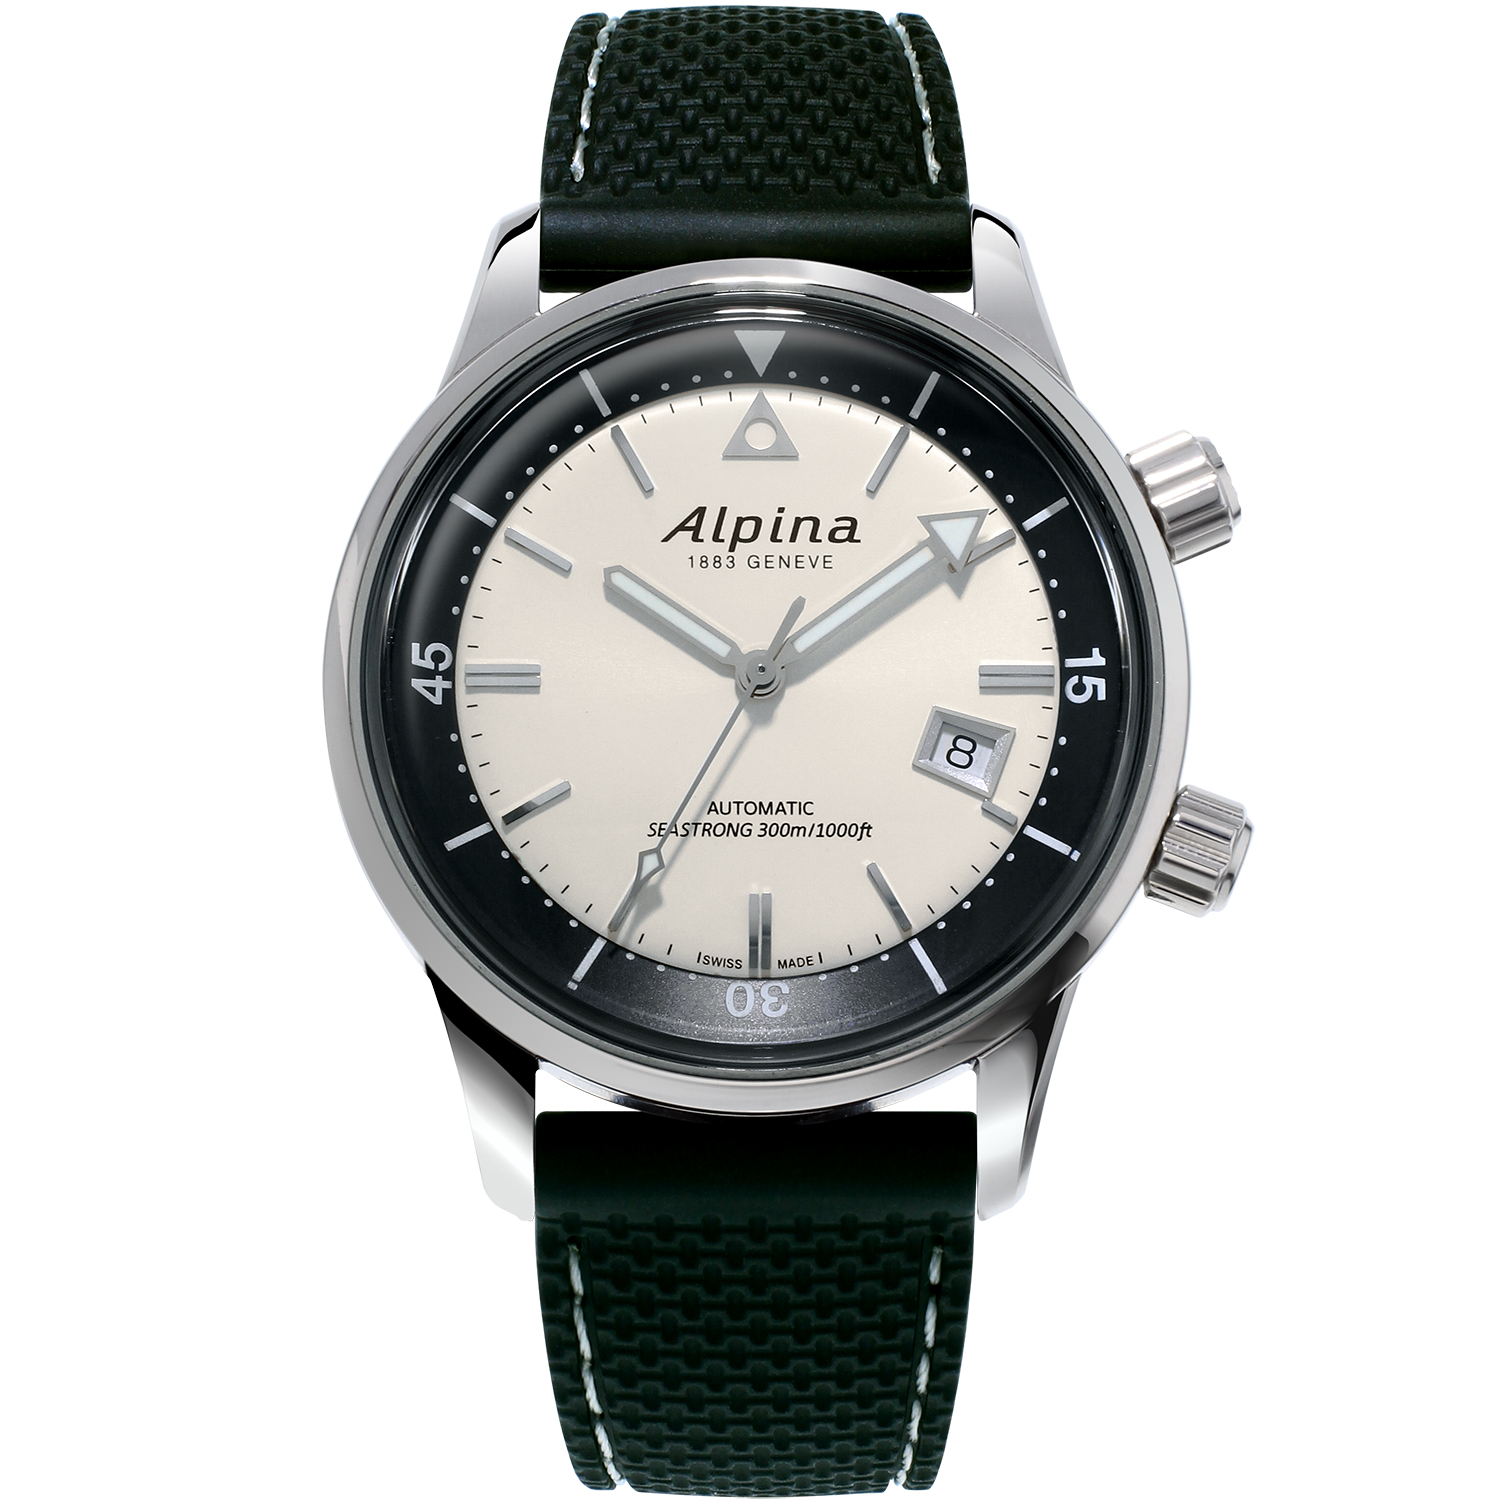 Alpina Seastrong Diver 300 Heritage Silver